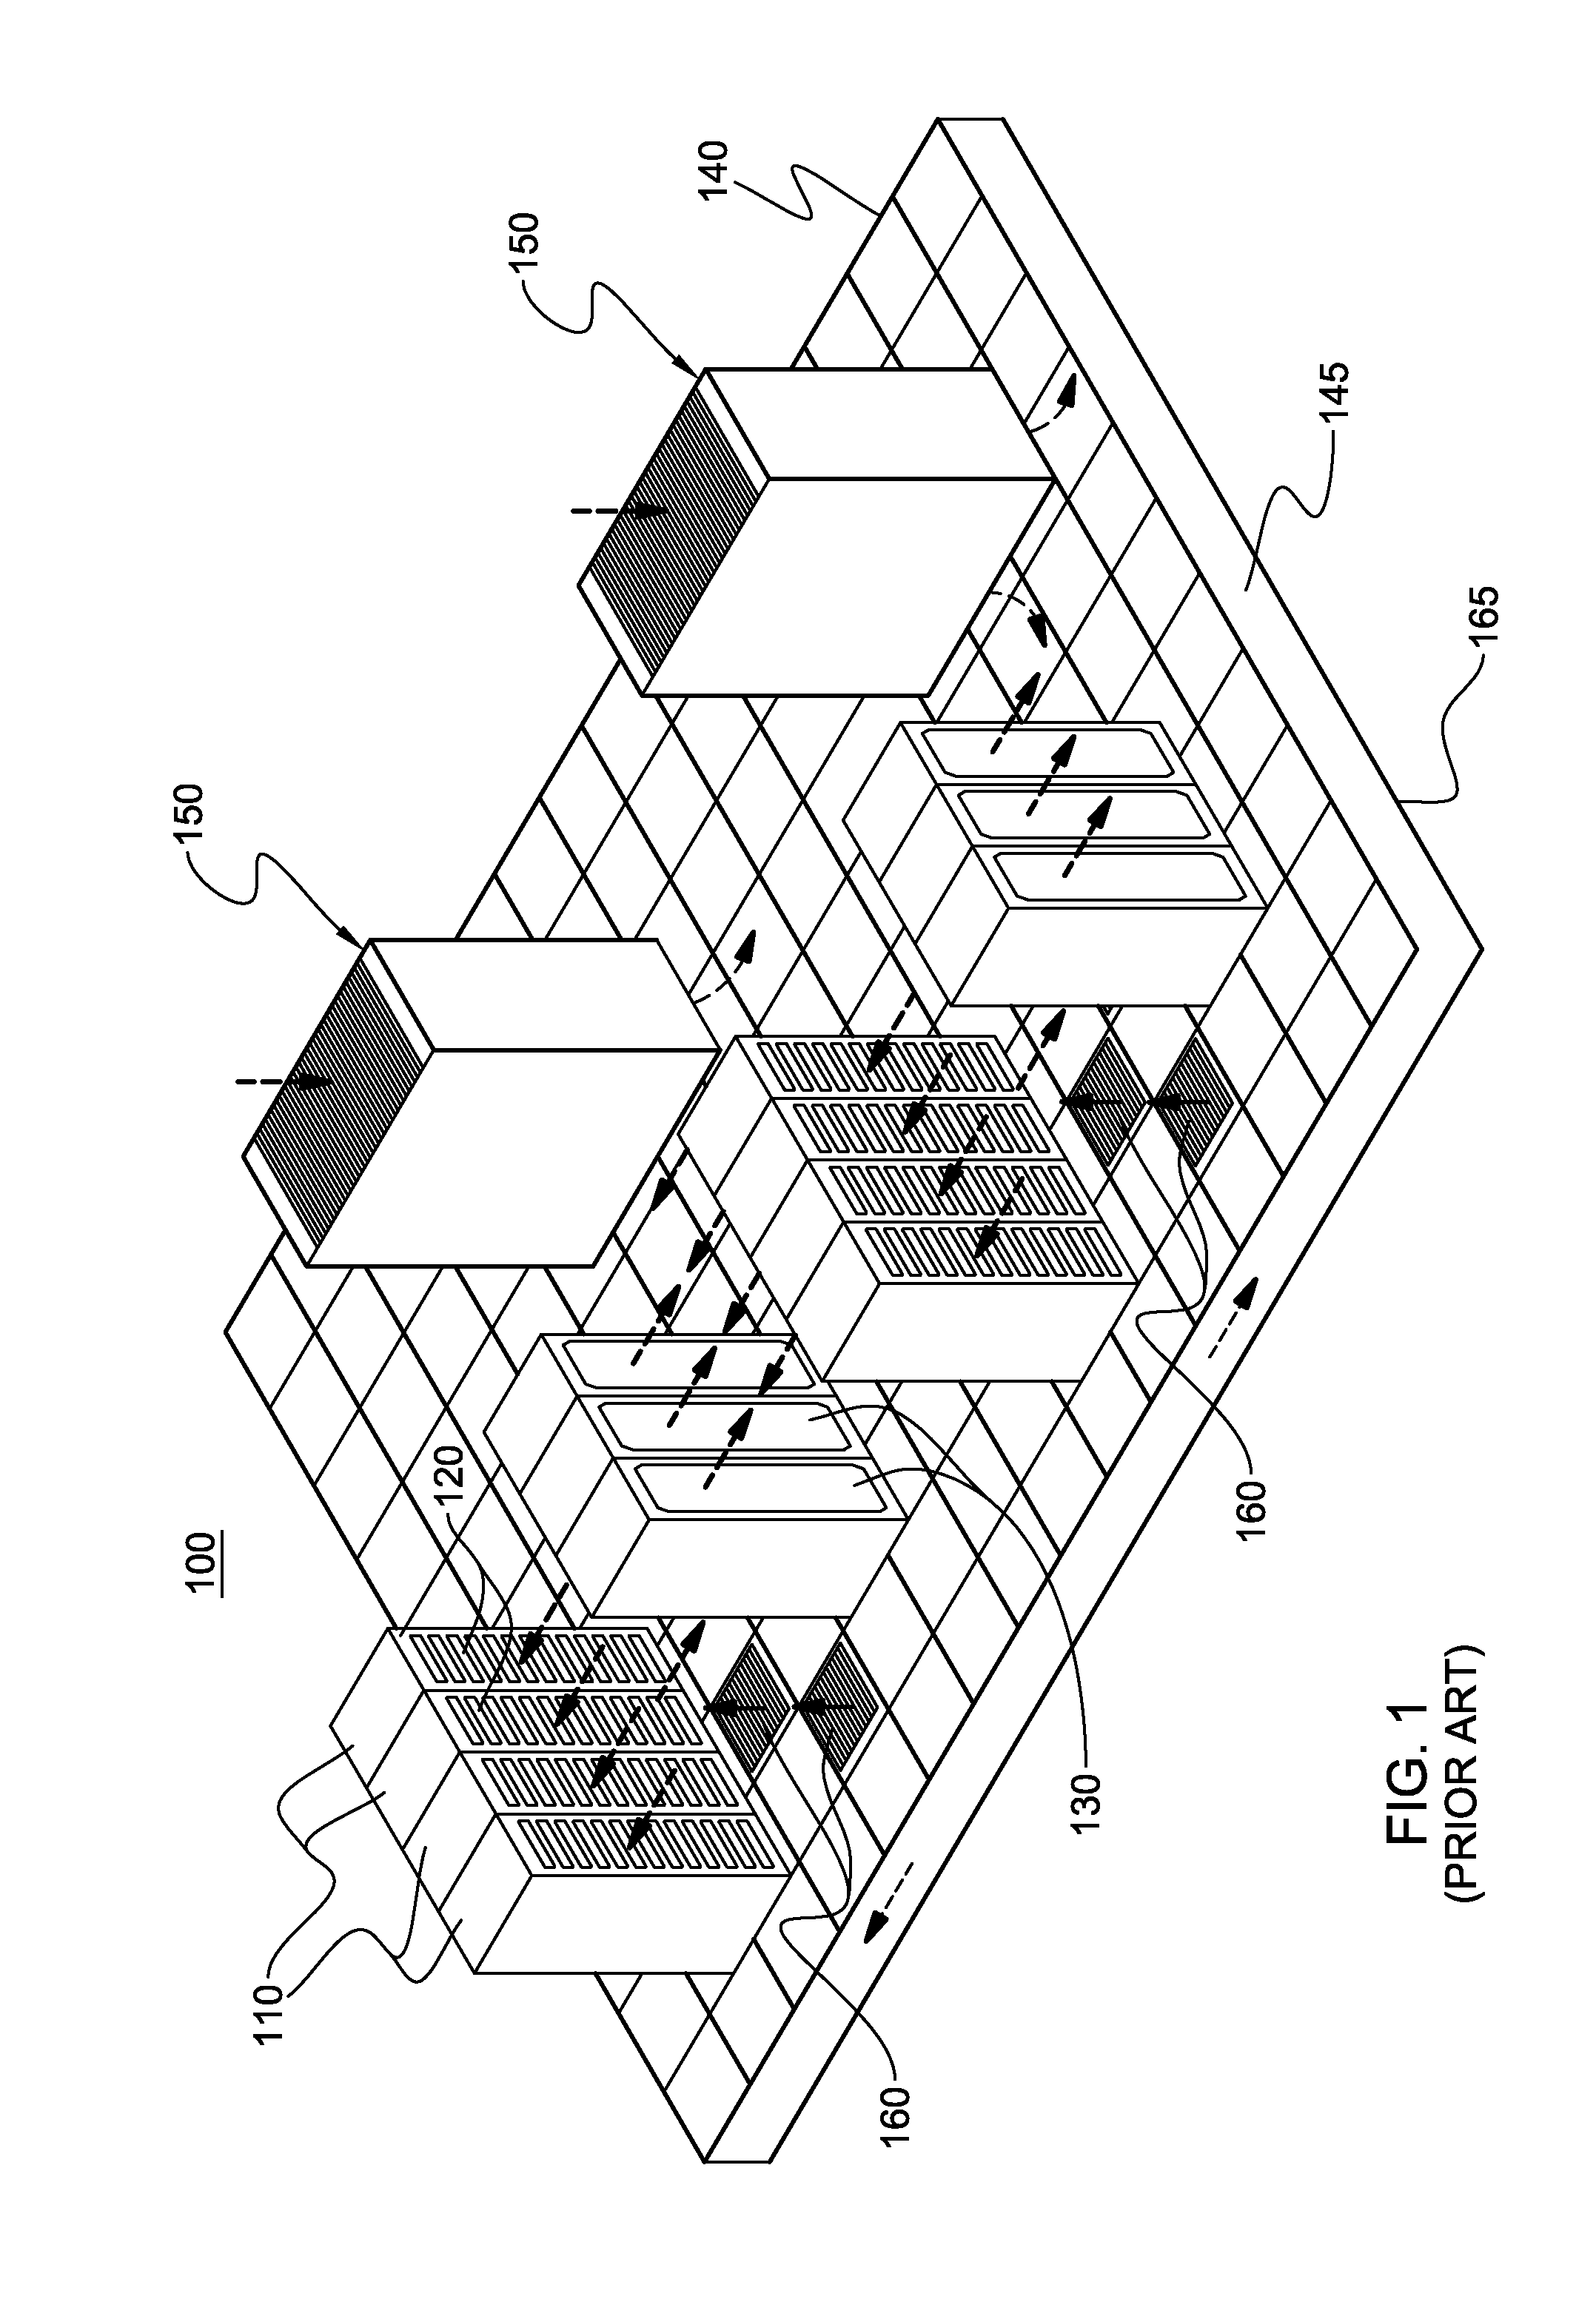 Vapor-compression refrigeration apparatus with backup air-cooled heat sink and auxiliary refrigerant heater